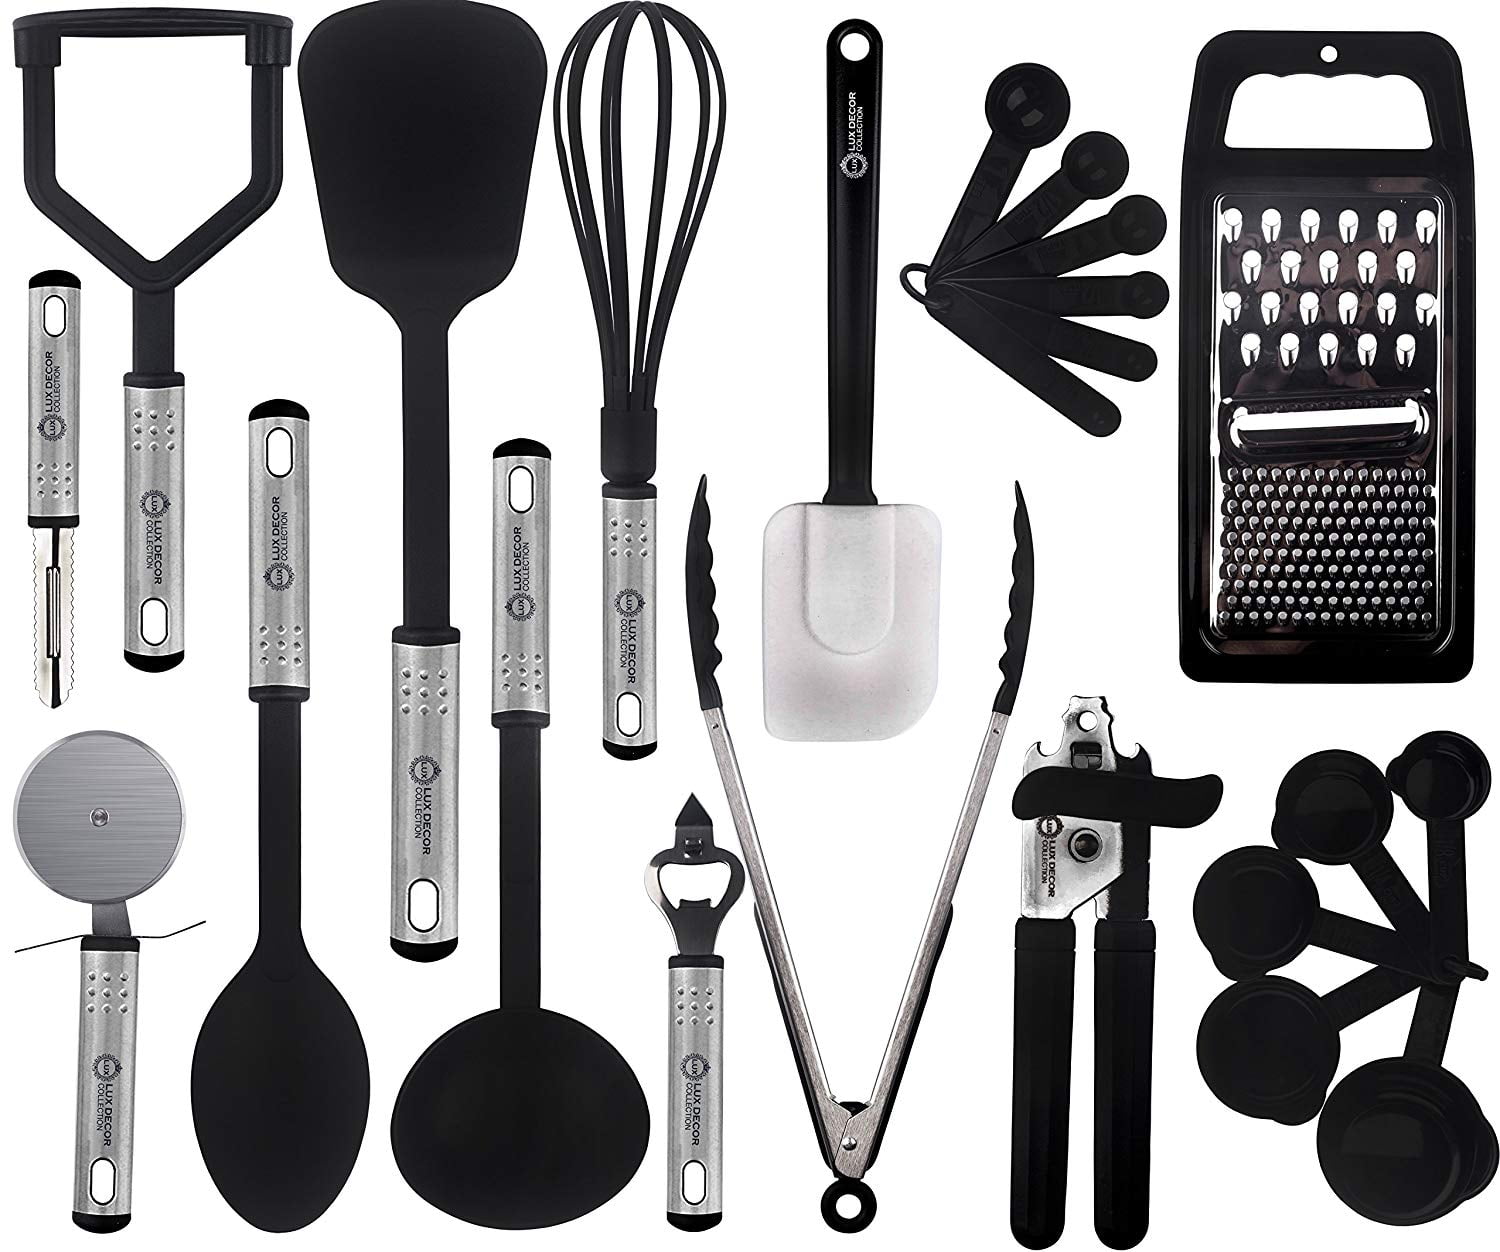 Kitchenaid Tool Set 15pc  Hy-Vee Aisles Online Grocery Shopping